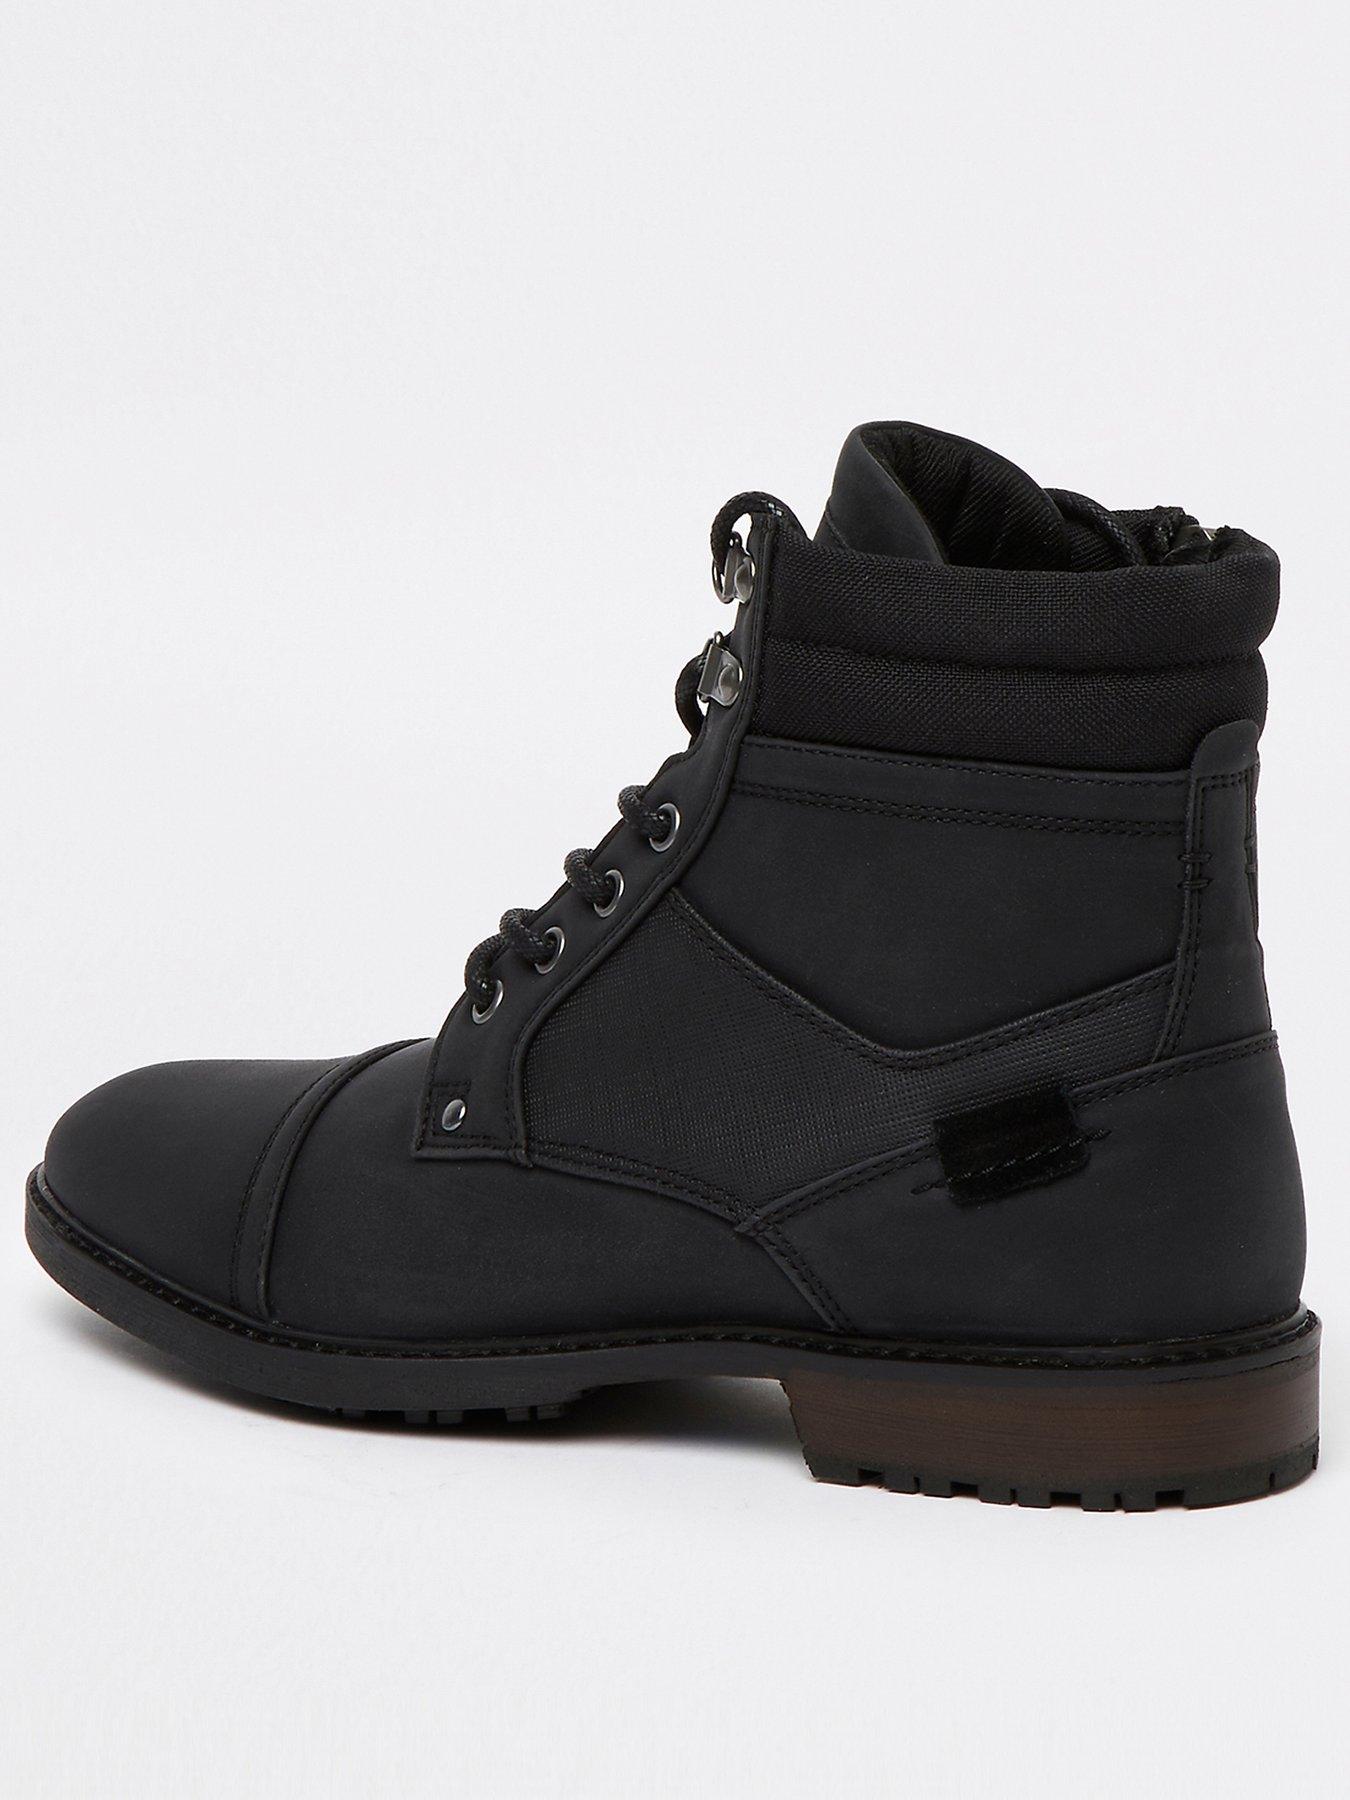 Shoes & boots Zip Lace Up Military Boots - Black